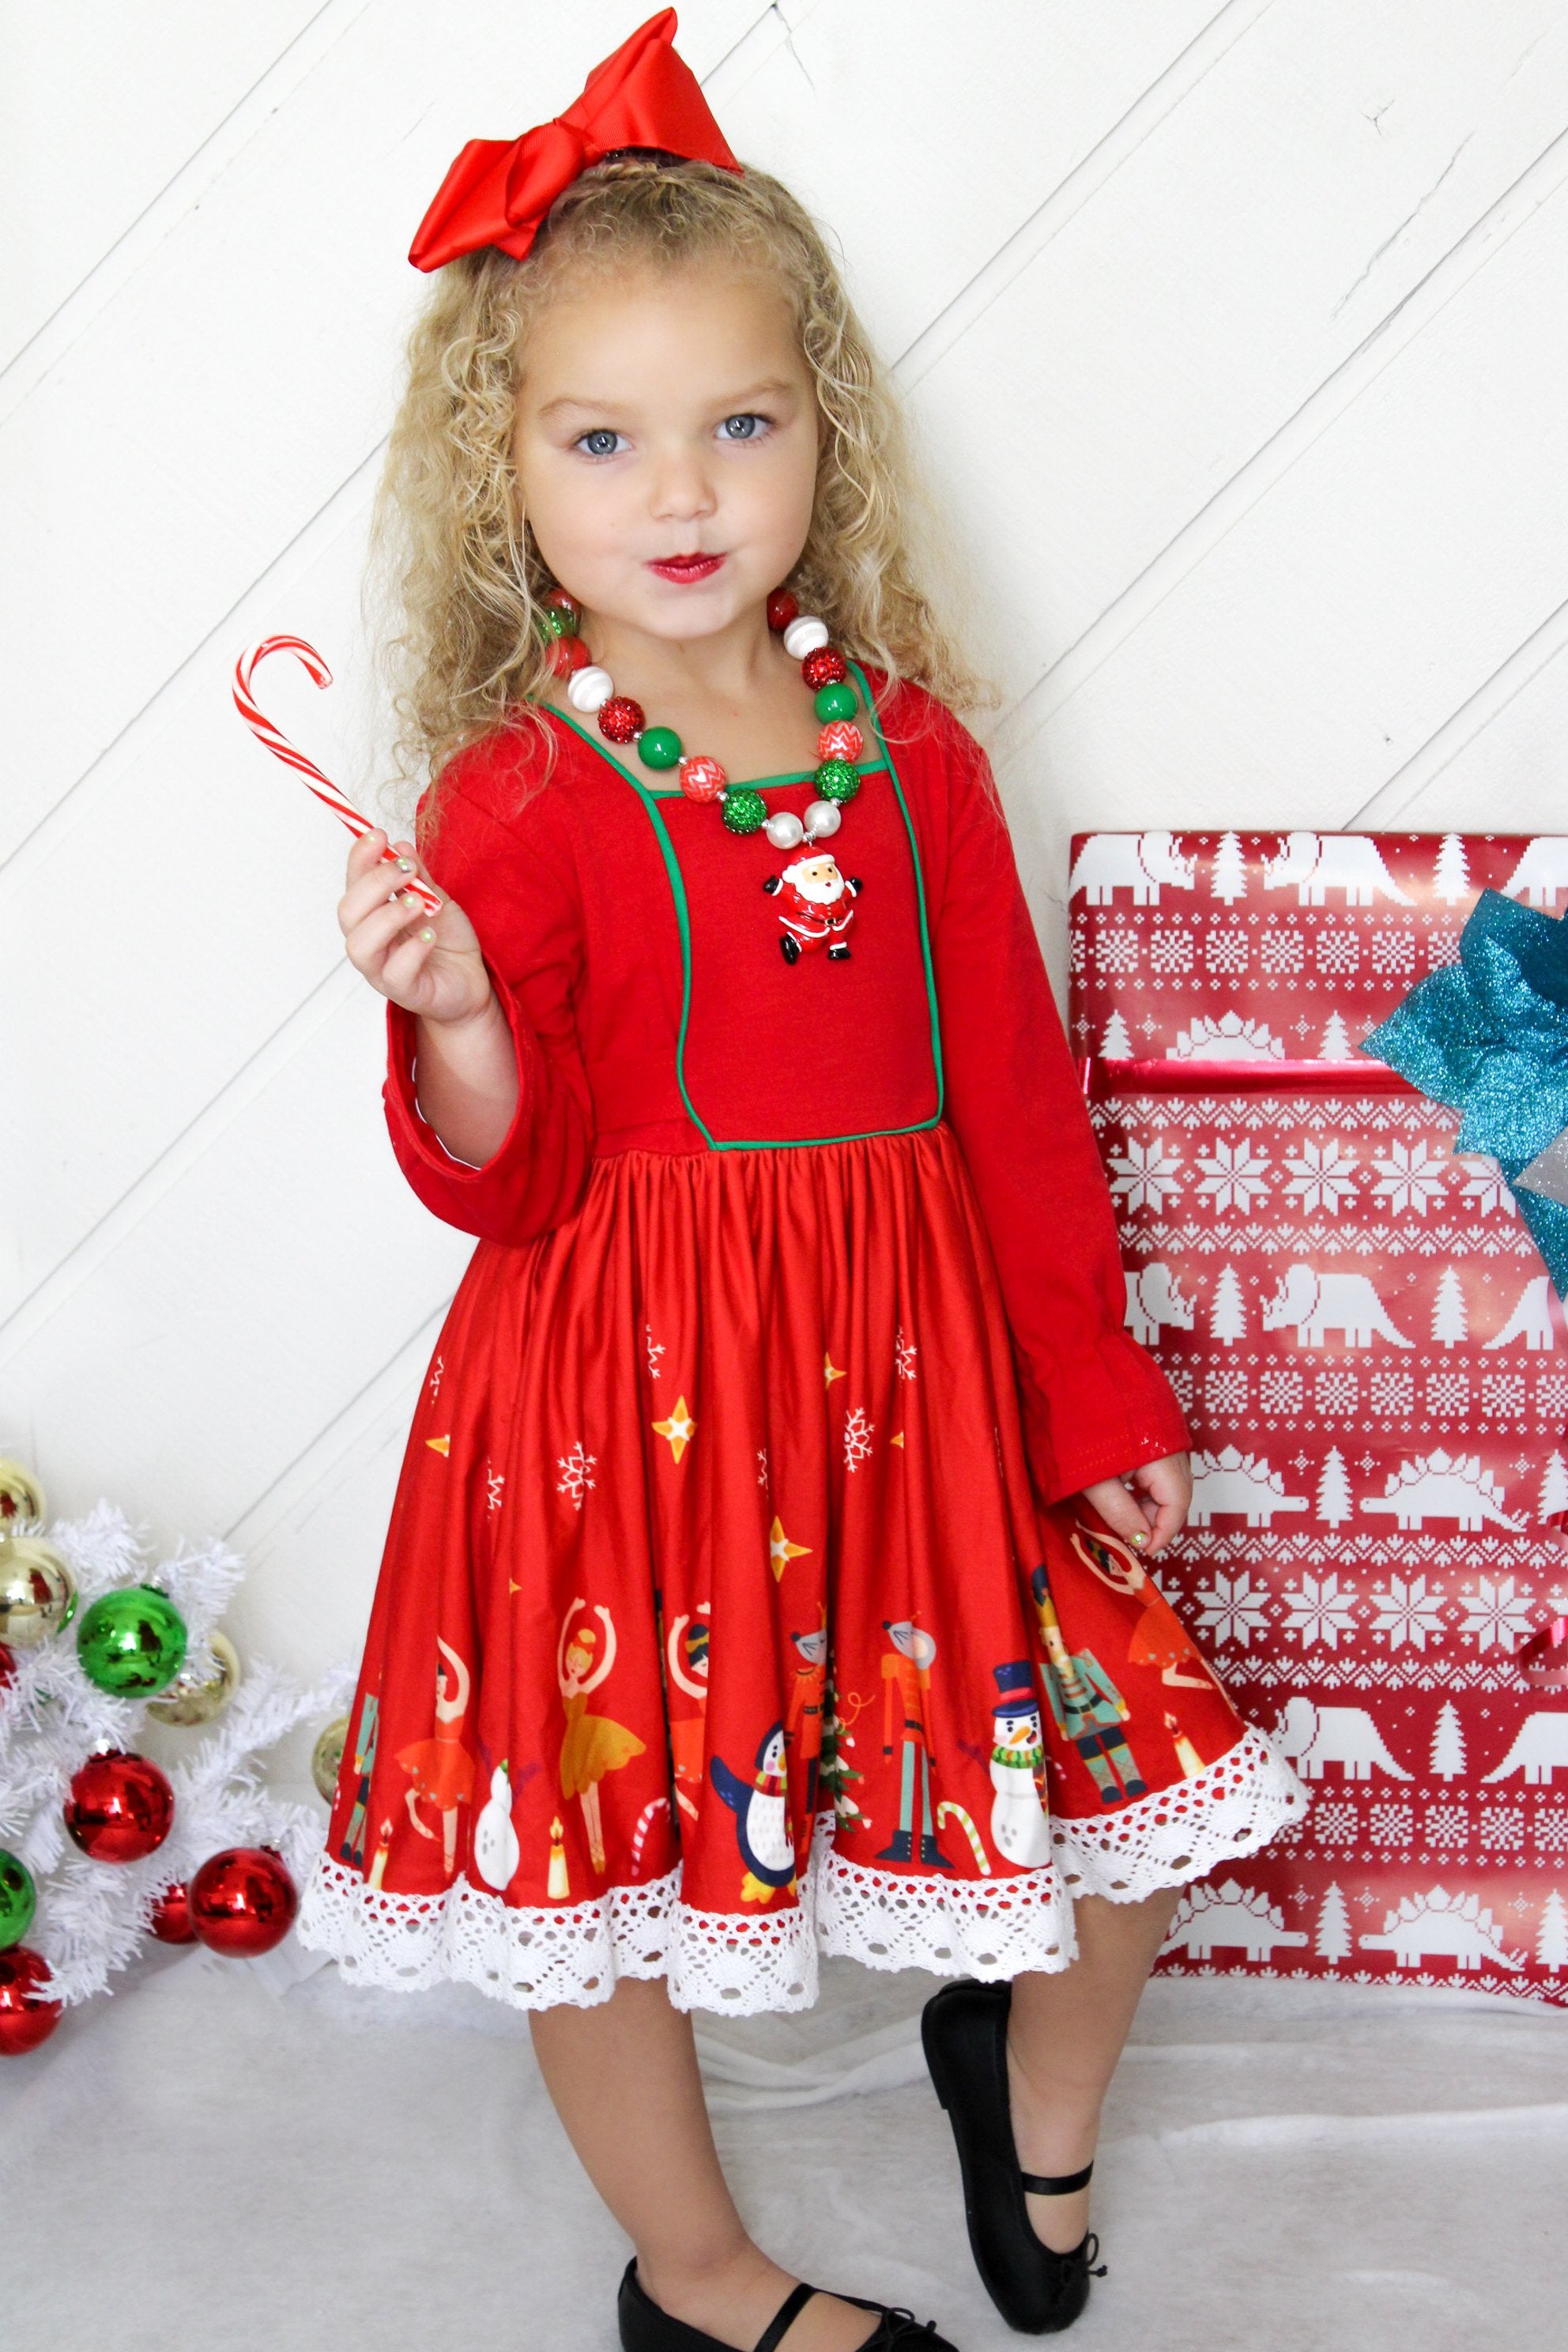 Baby Toddler Little Girls Christmas Holiday Nutcracker Ballet Soldier Dress - Red/Red (Free Bloomers For Baby Sizes) - Angeline Kids